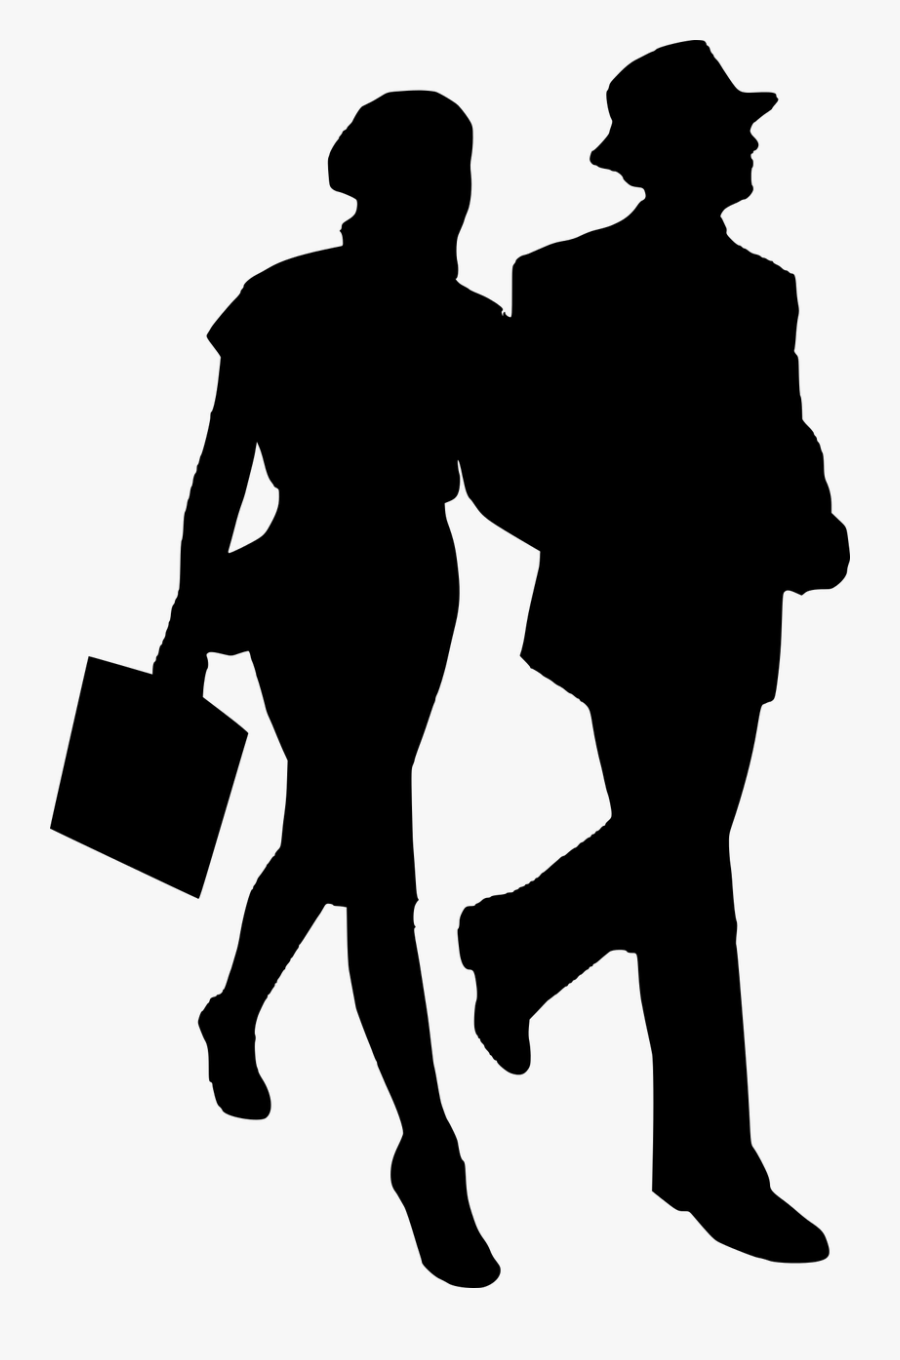 Vector Free Download At Getdrawings Com Free For Personal - Usiness Man And Woman Silhouette, Transparent Clipart